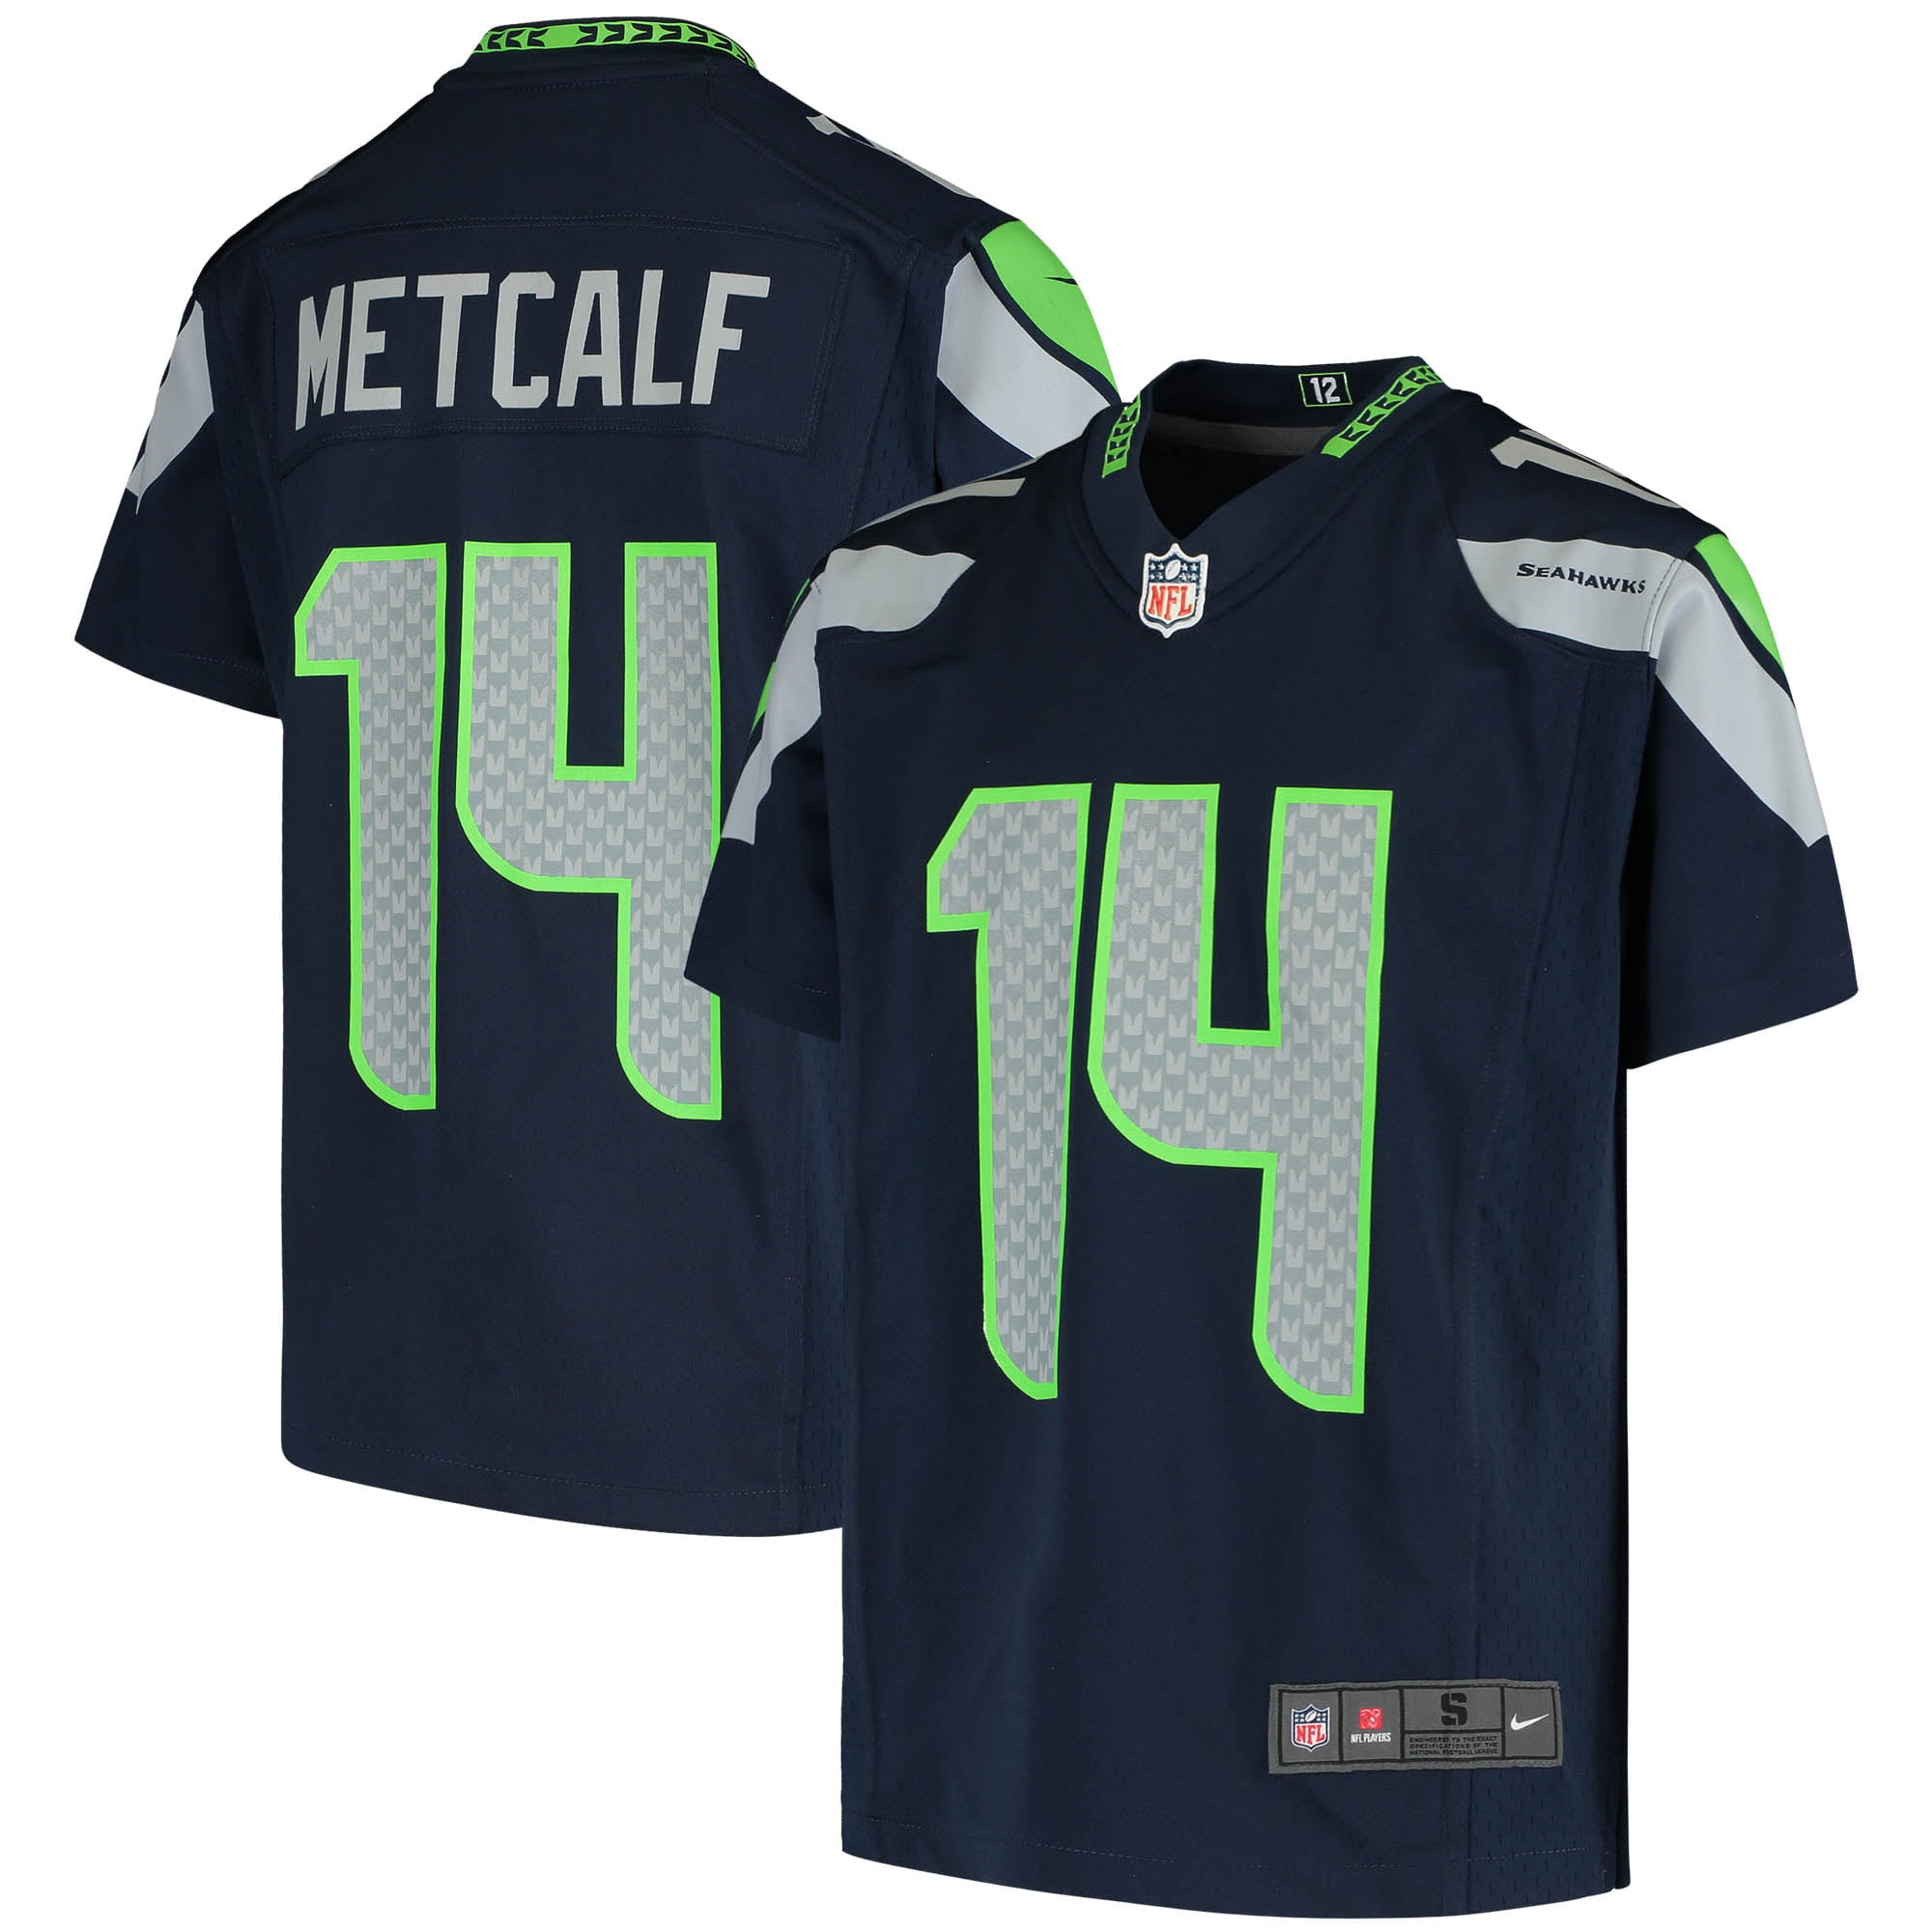 metcalf jersey youth